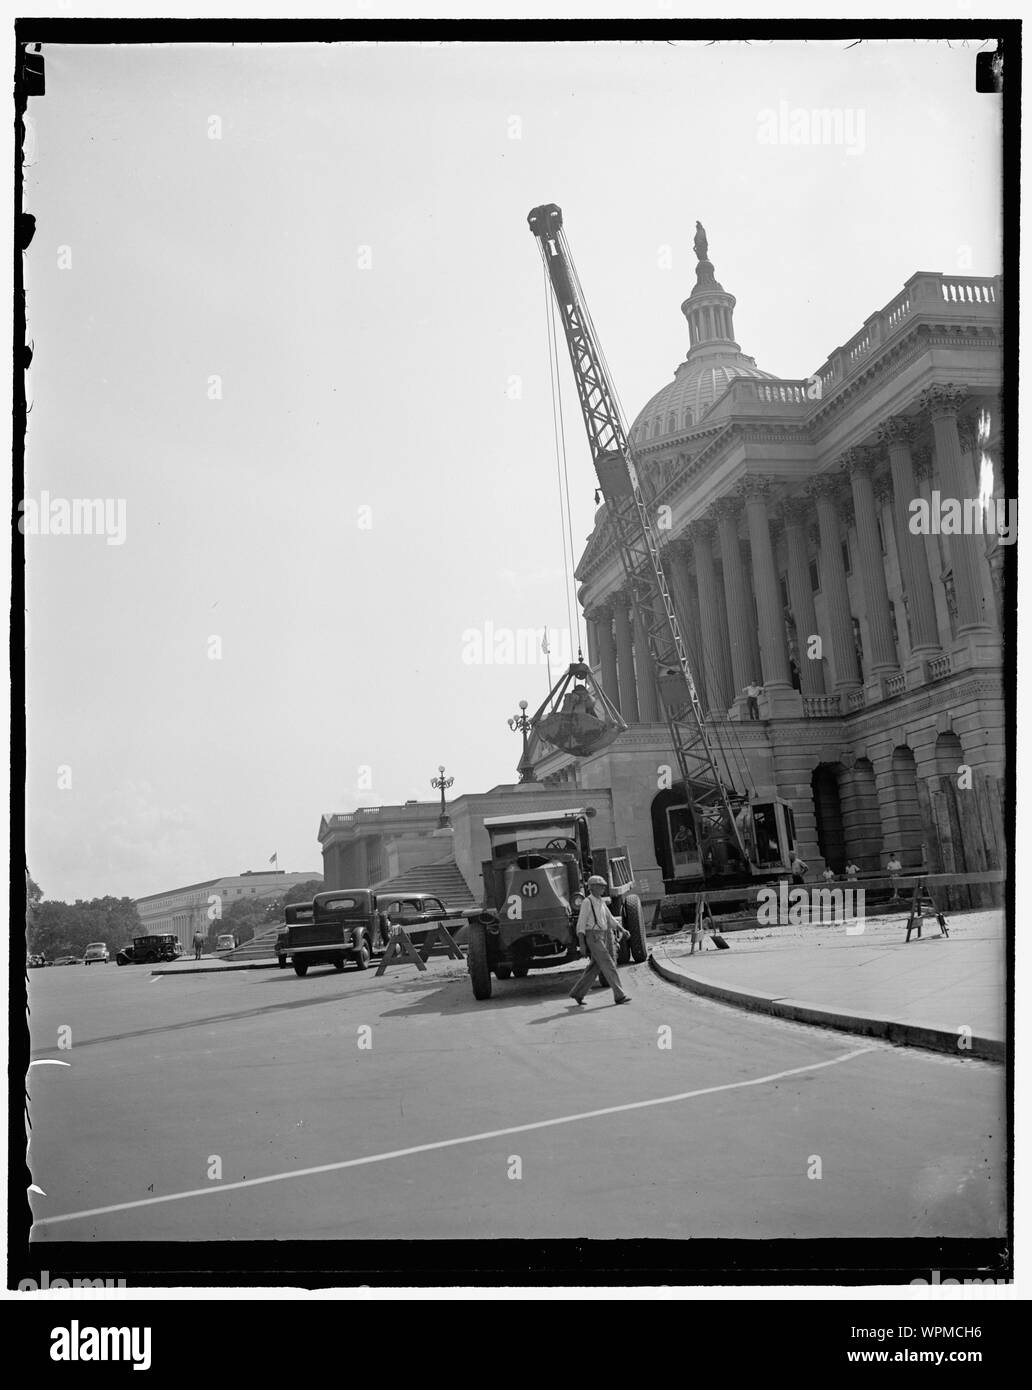 Lost: a cold water pipe. Washington, D.C., Sept. 5. Seeking a lost water line running from the house office building through the Capitol, workmen are digging up the Capitol ground with a steam shovel. When they find the pipe, they will make a connection in order to supply chilled water for the air conditioning of the Senate office building. Stock Photo